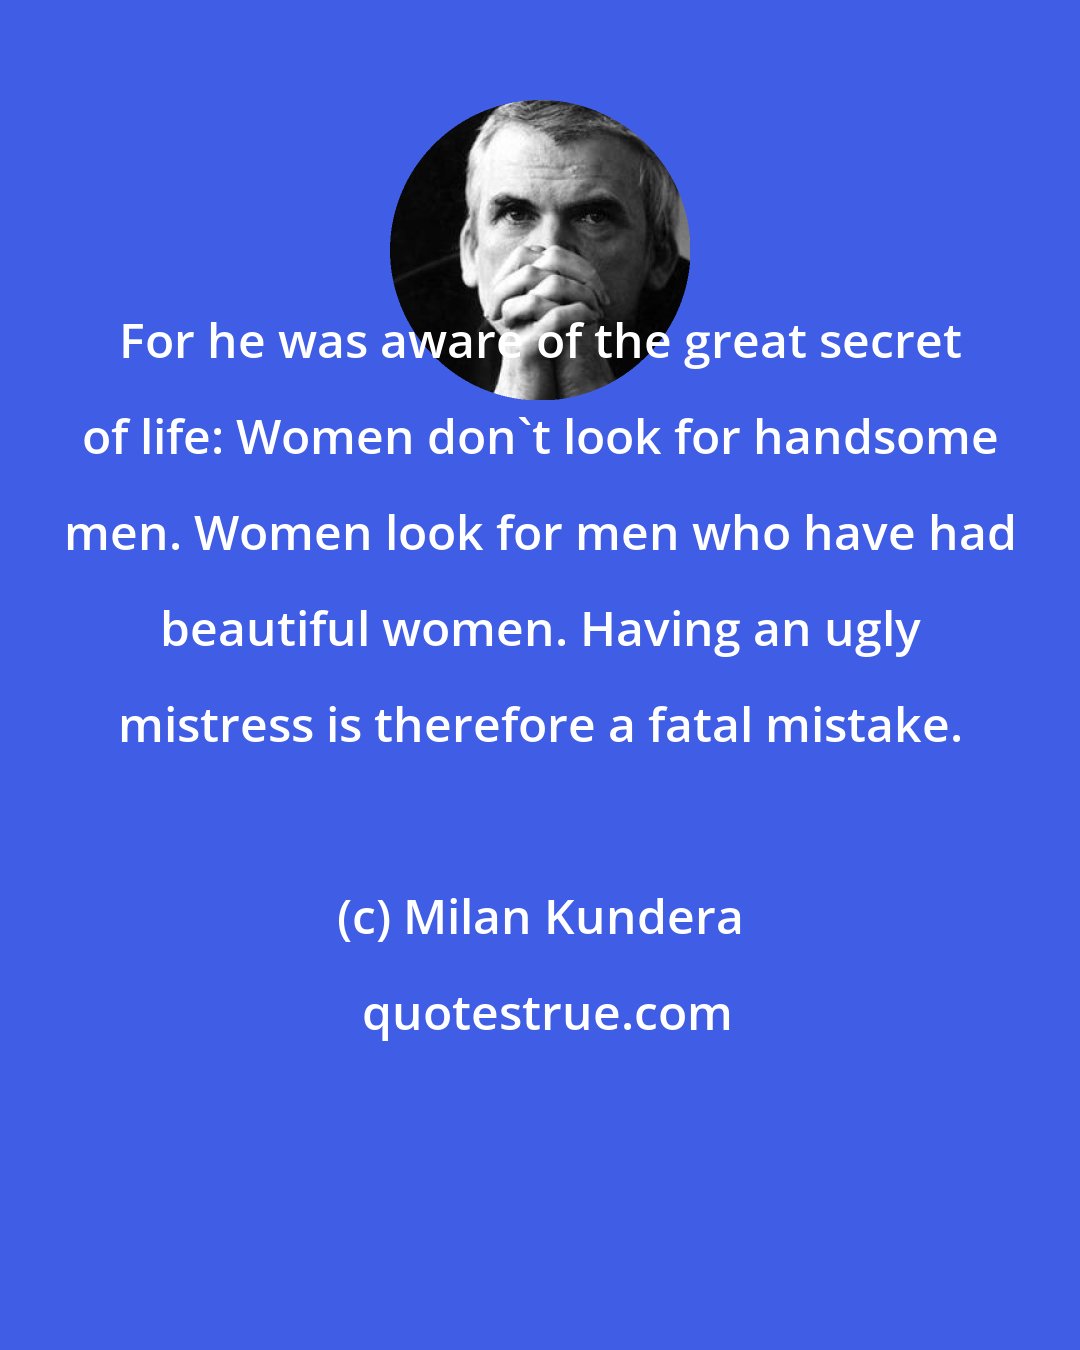 Milan Kundera: For he was aware of the great secret of life: Women don't look for handsome men. Women look for men who have had beautiful women. Having an ugly mistress is therefore a fatal mistake.